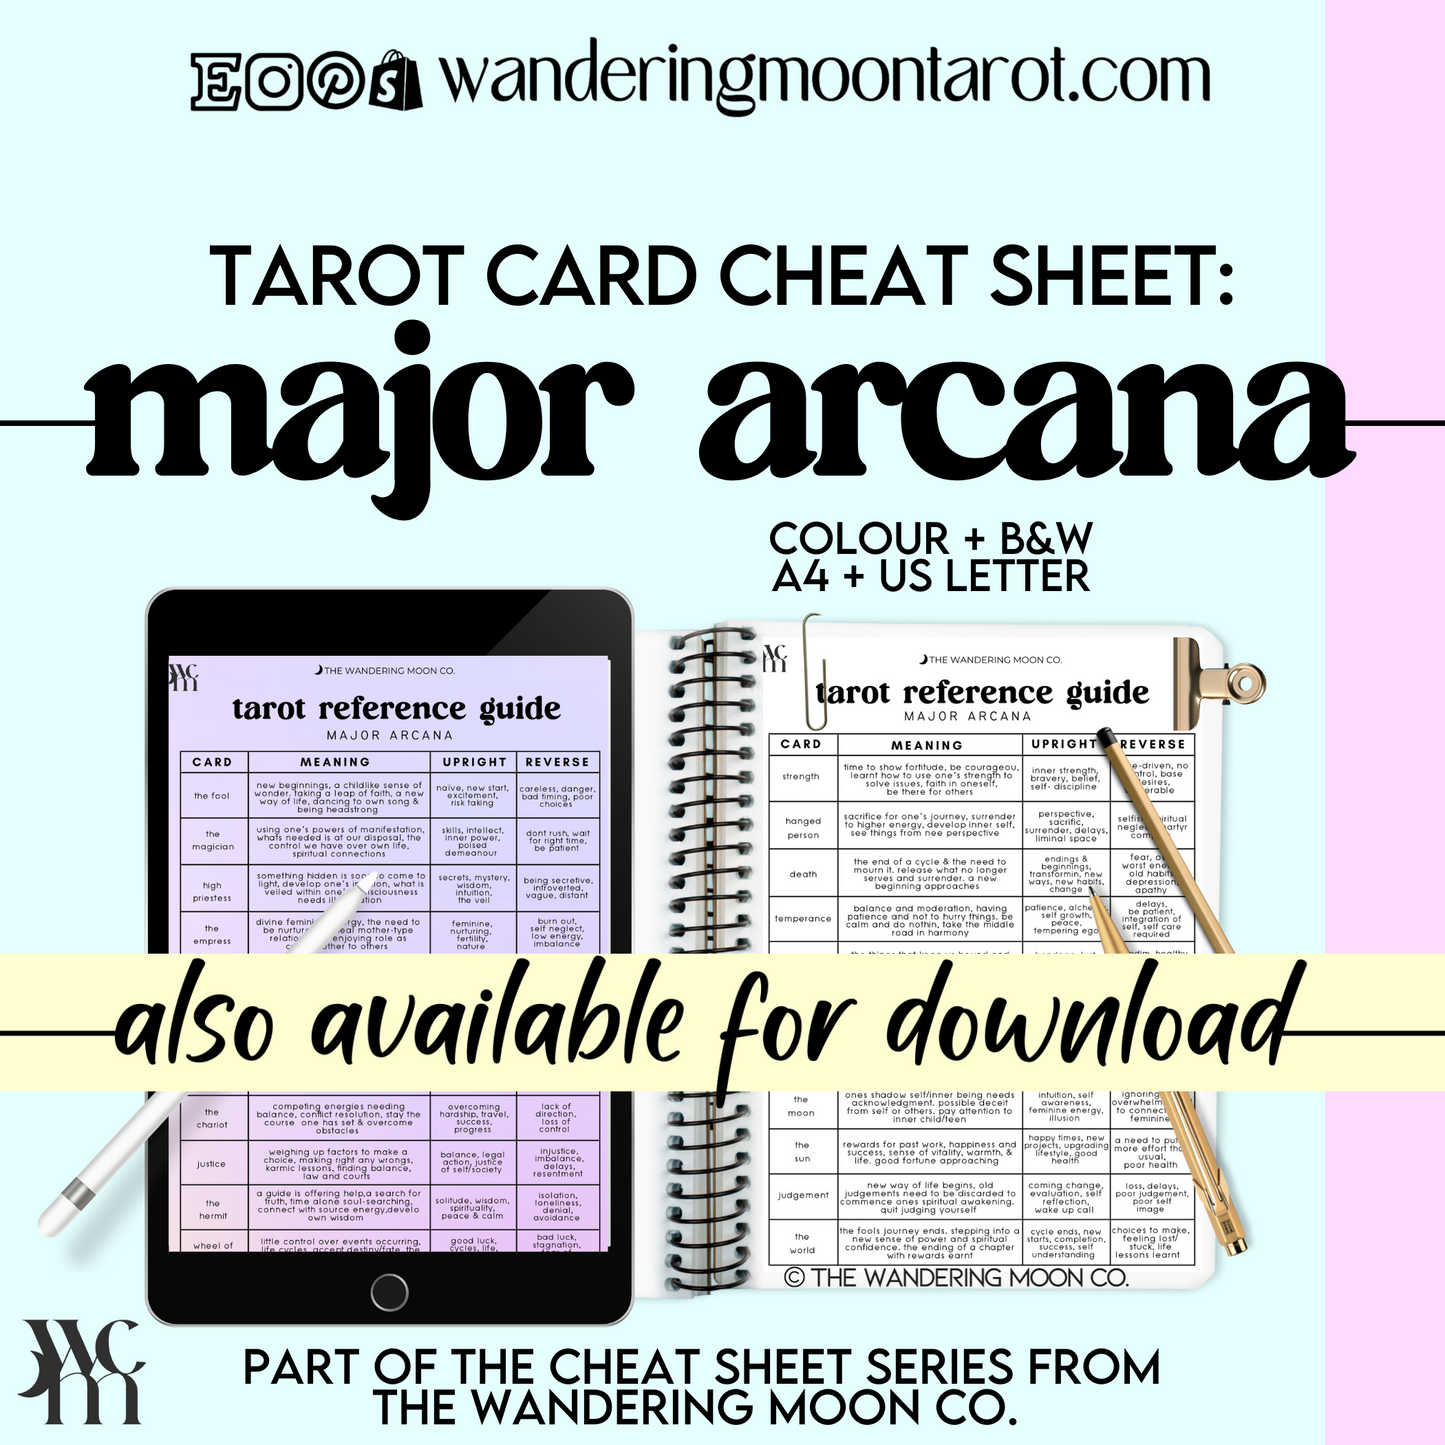 Tarot cards and Numerology cheat sheet - Reference guide PDF - Instant access - Learn Numerology